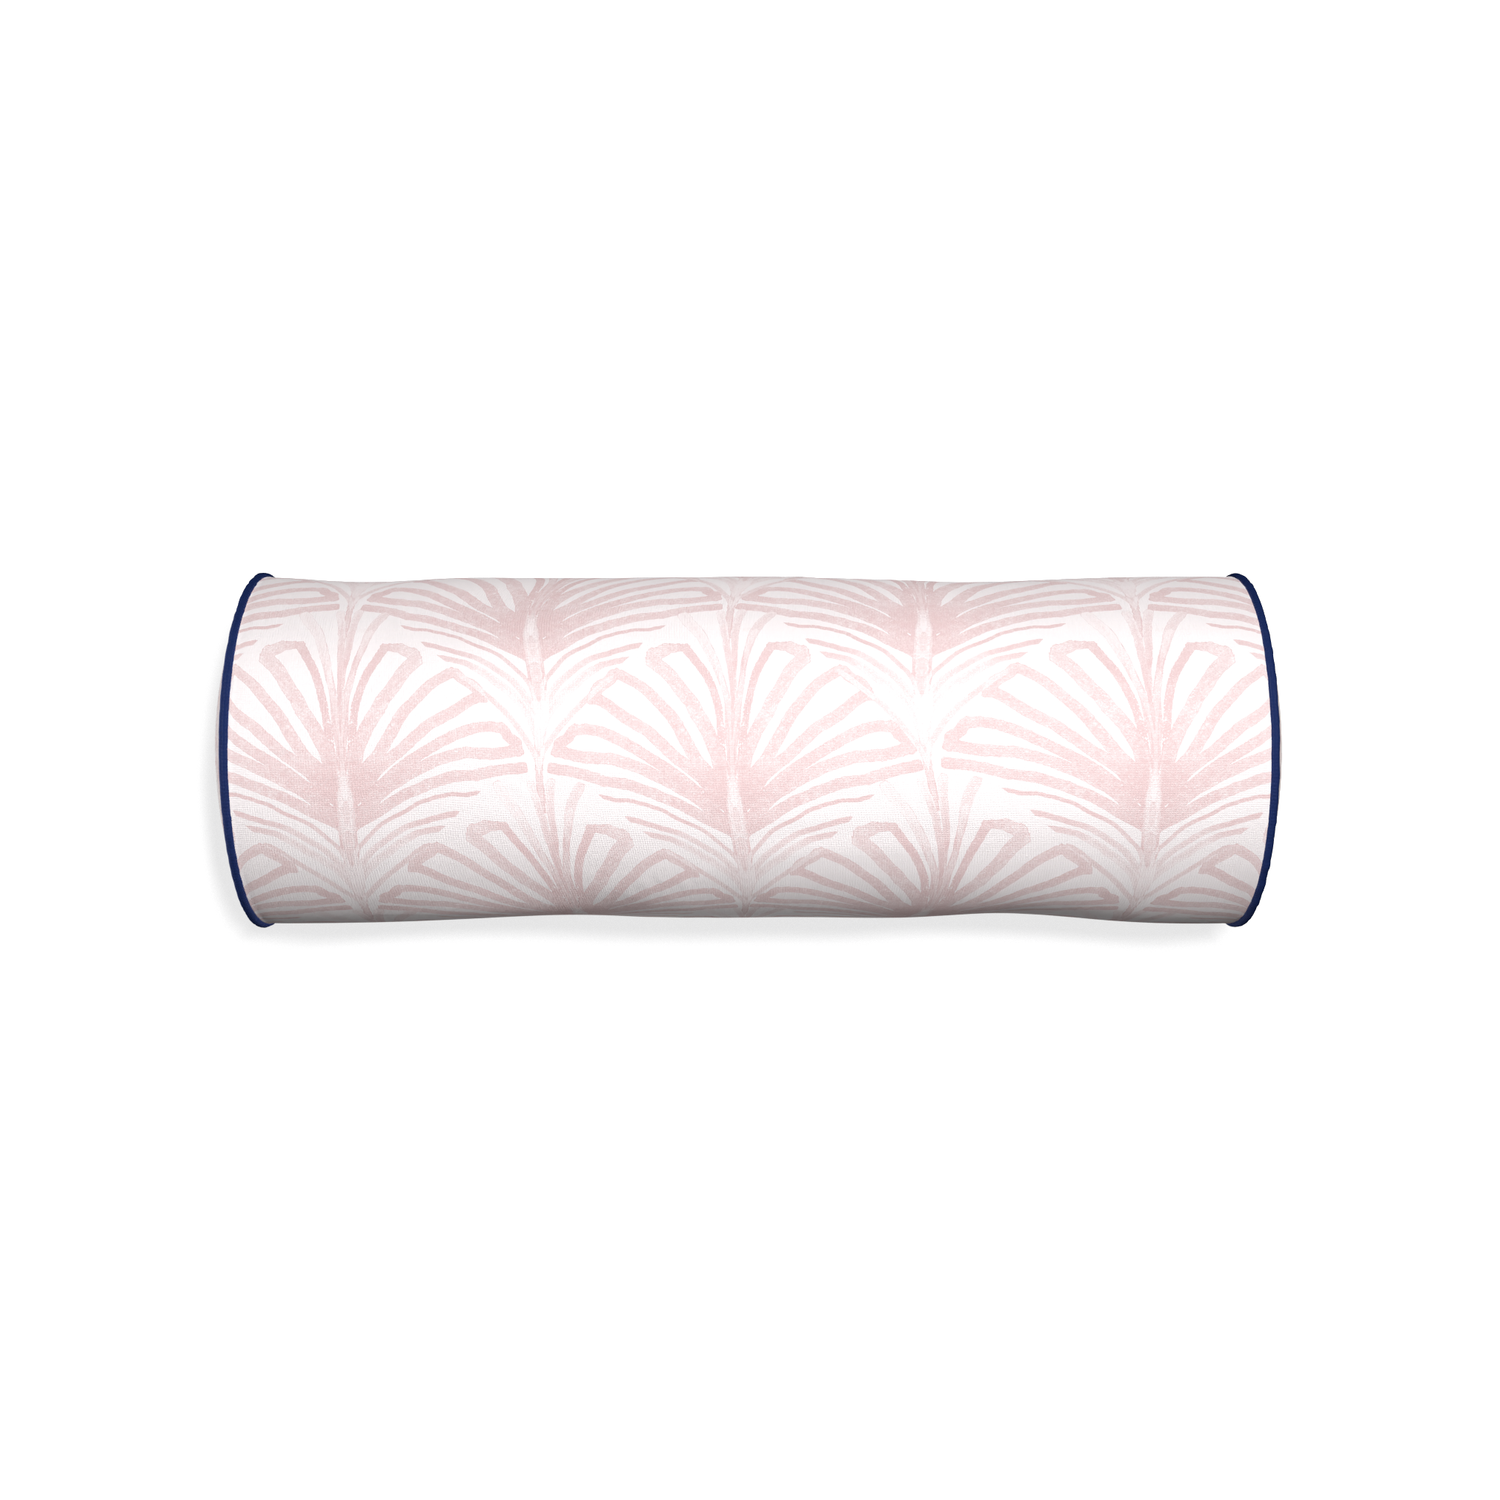 Bolster suzy rose custom rose pink palmpillow with midnight piping on white background